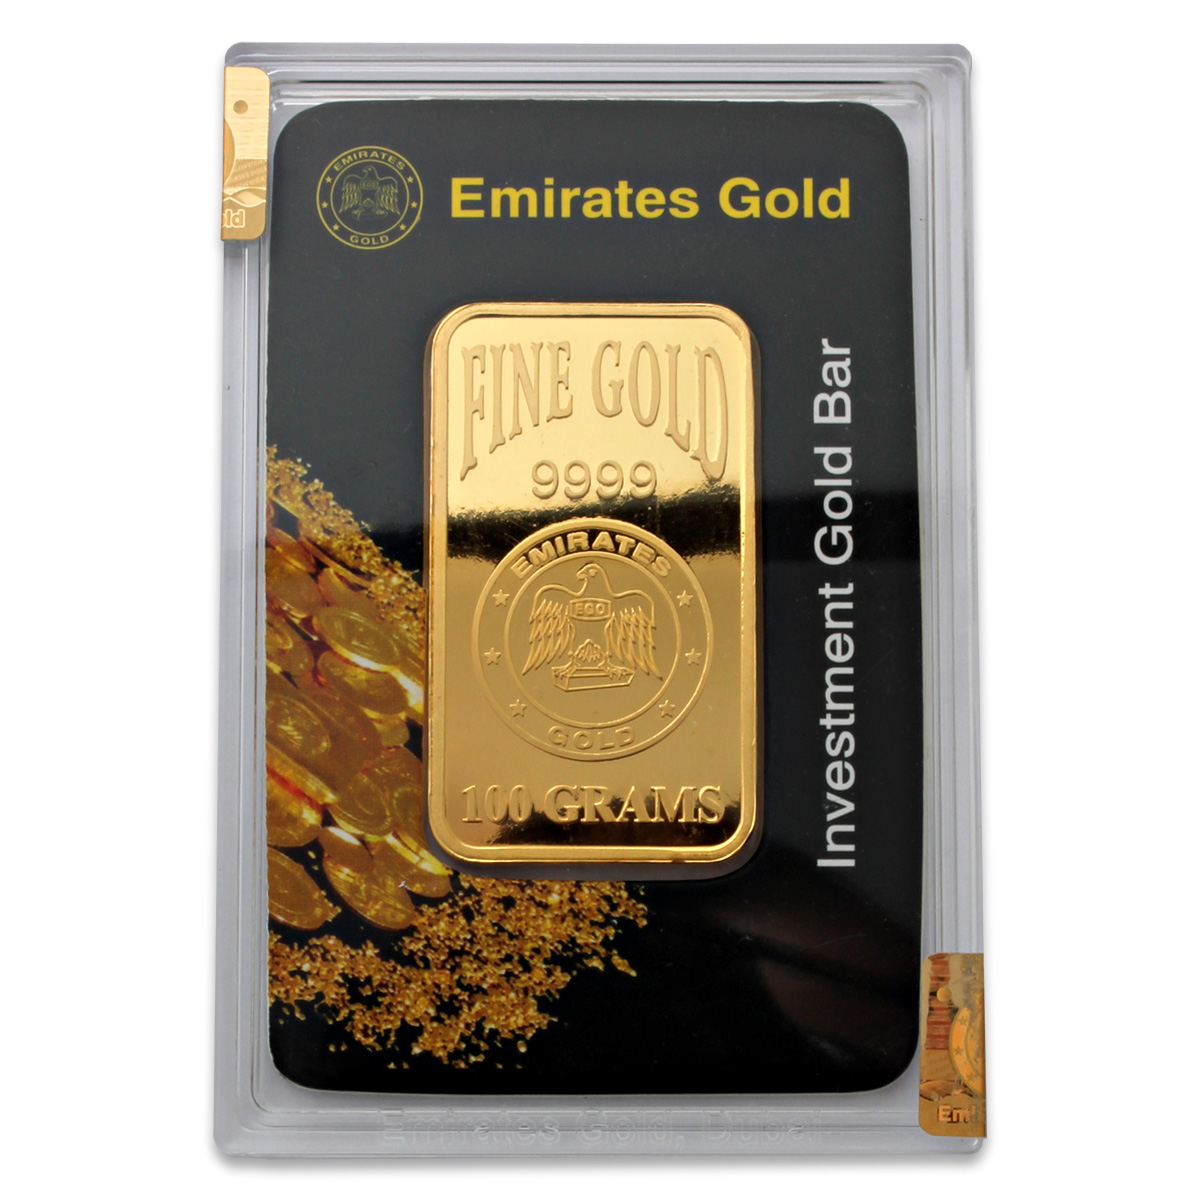 100g Gold Bar - Emirates Gold Boxed Certified